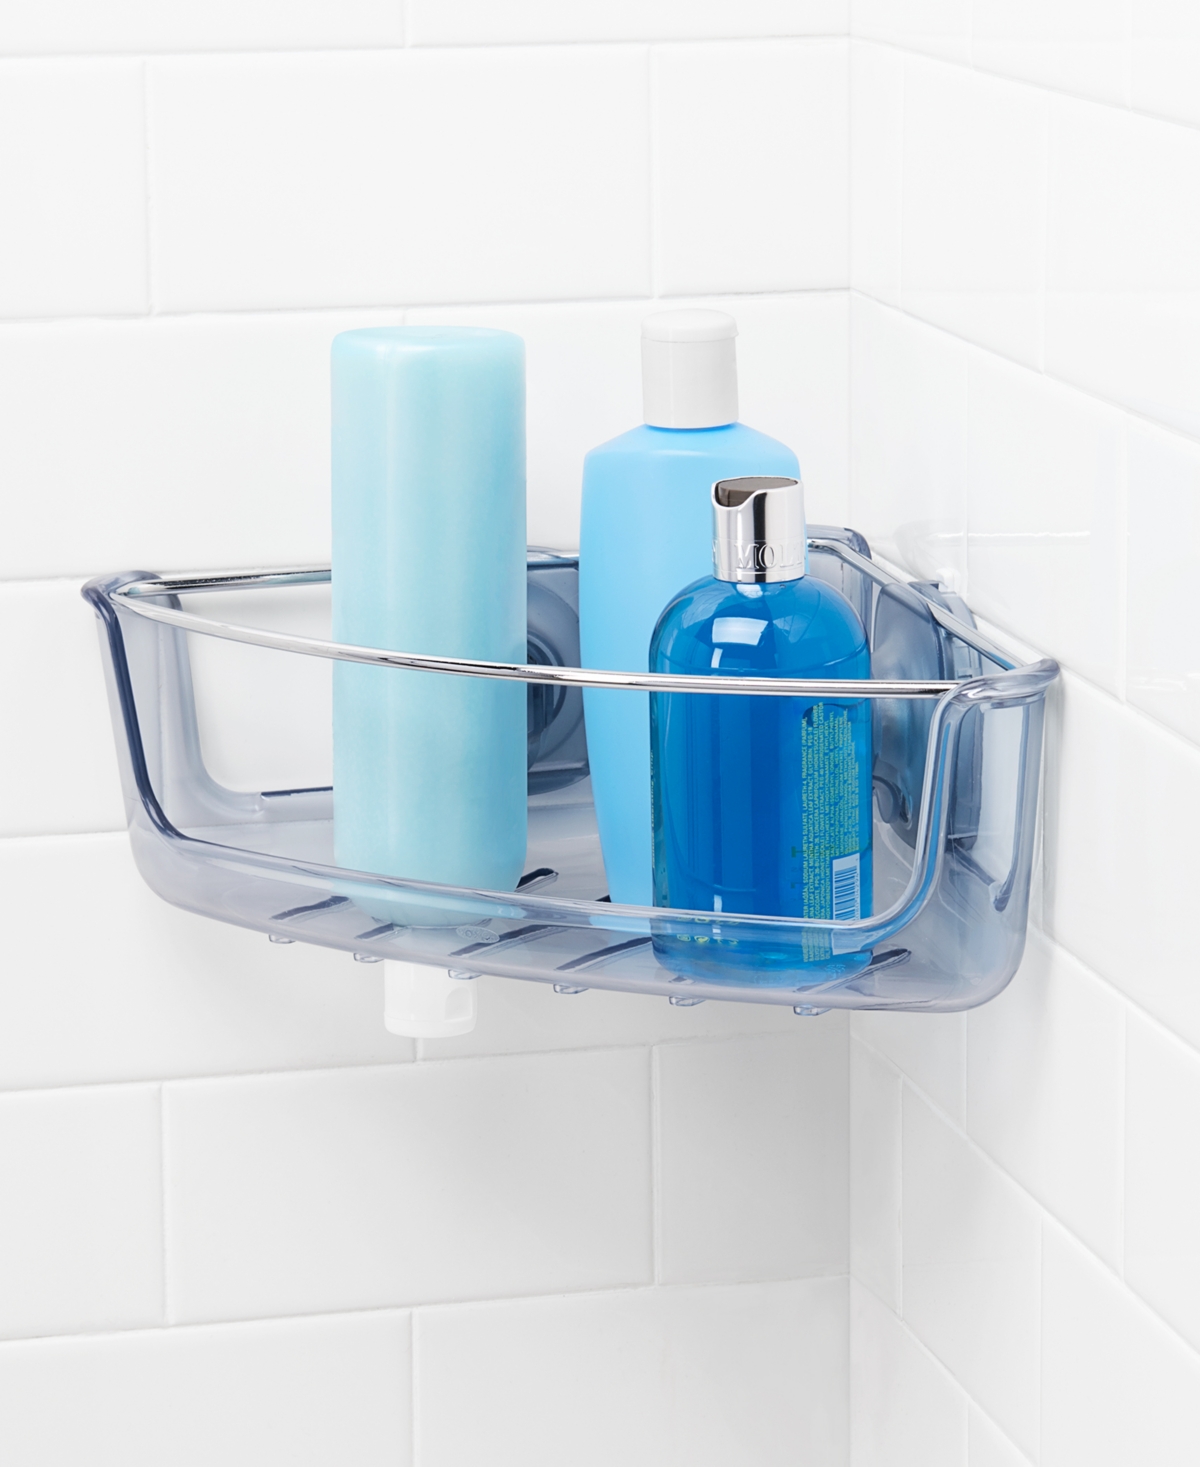 Simplehuman 8' Tension Shower Caddy and Foldaway Squeegee